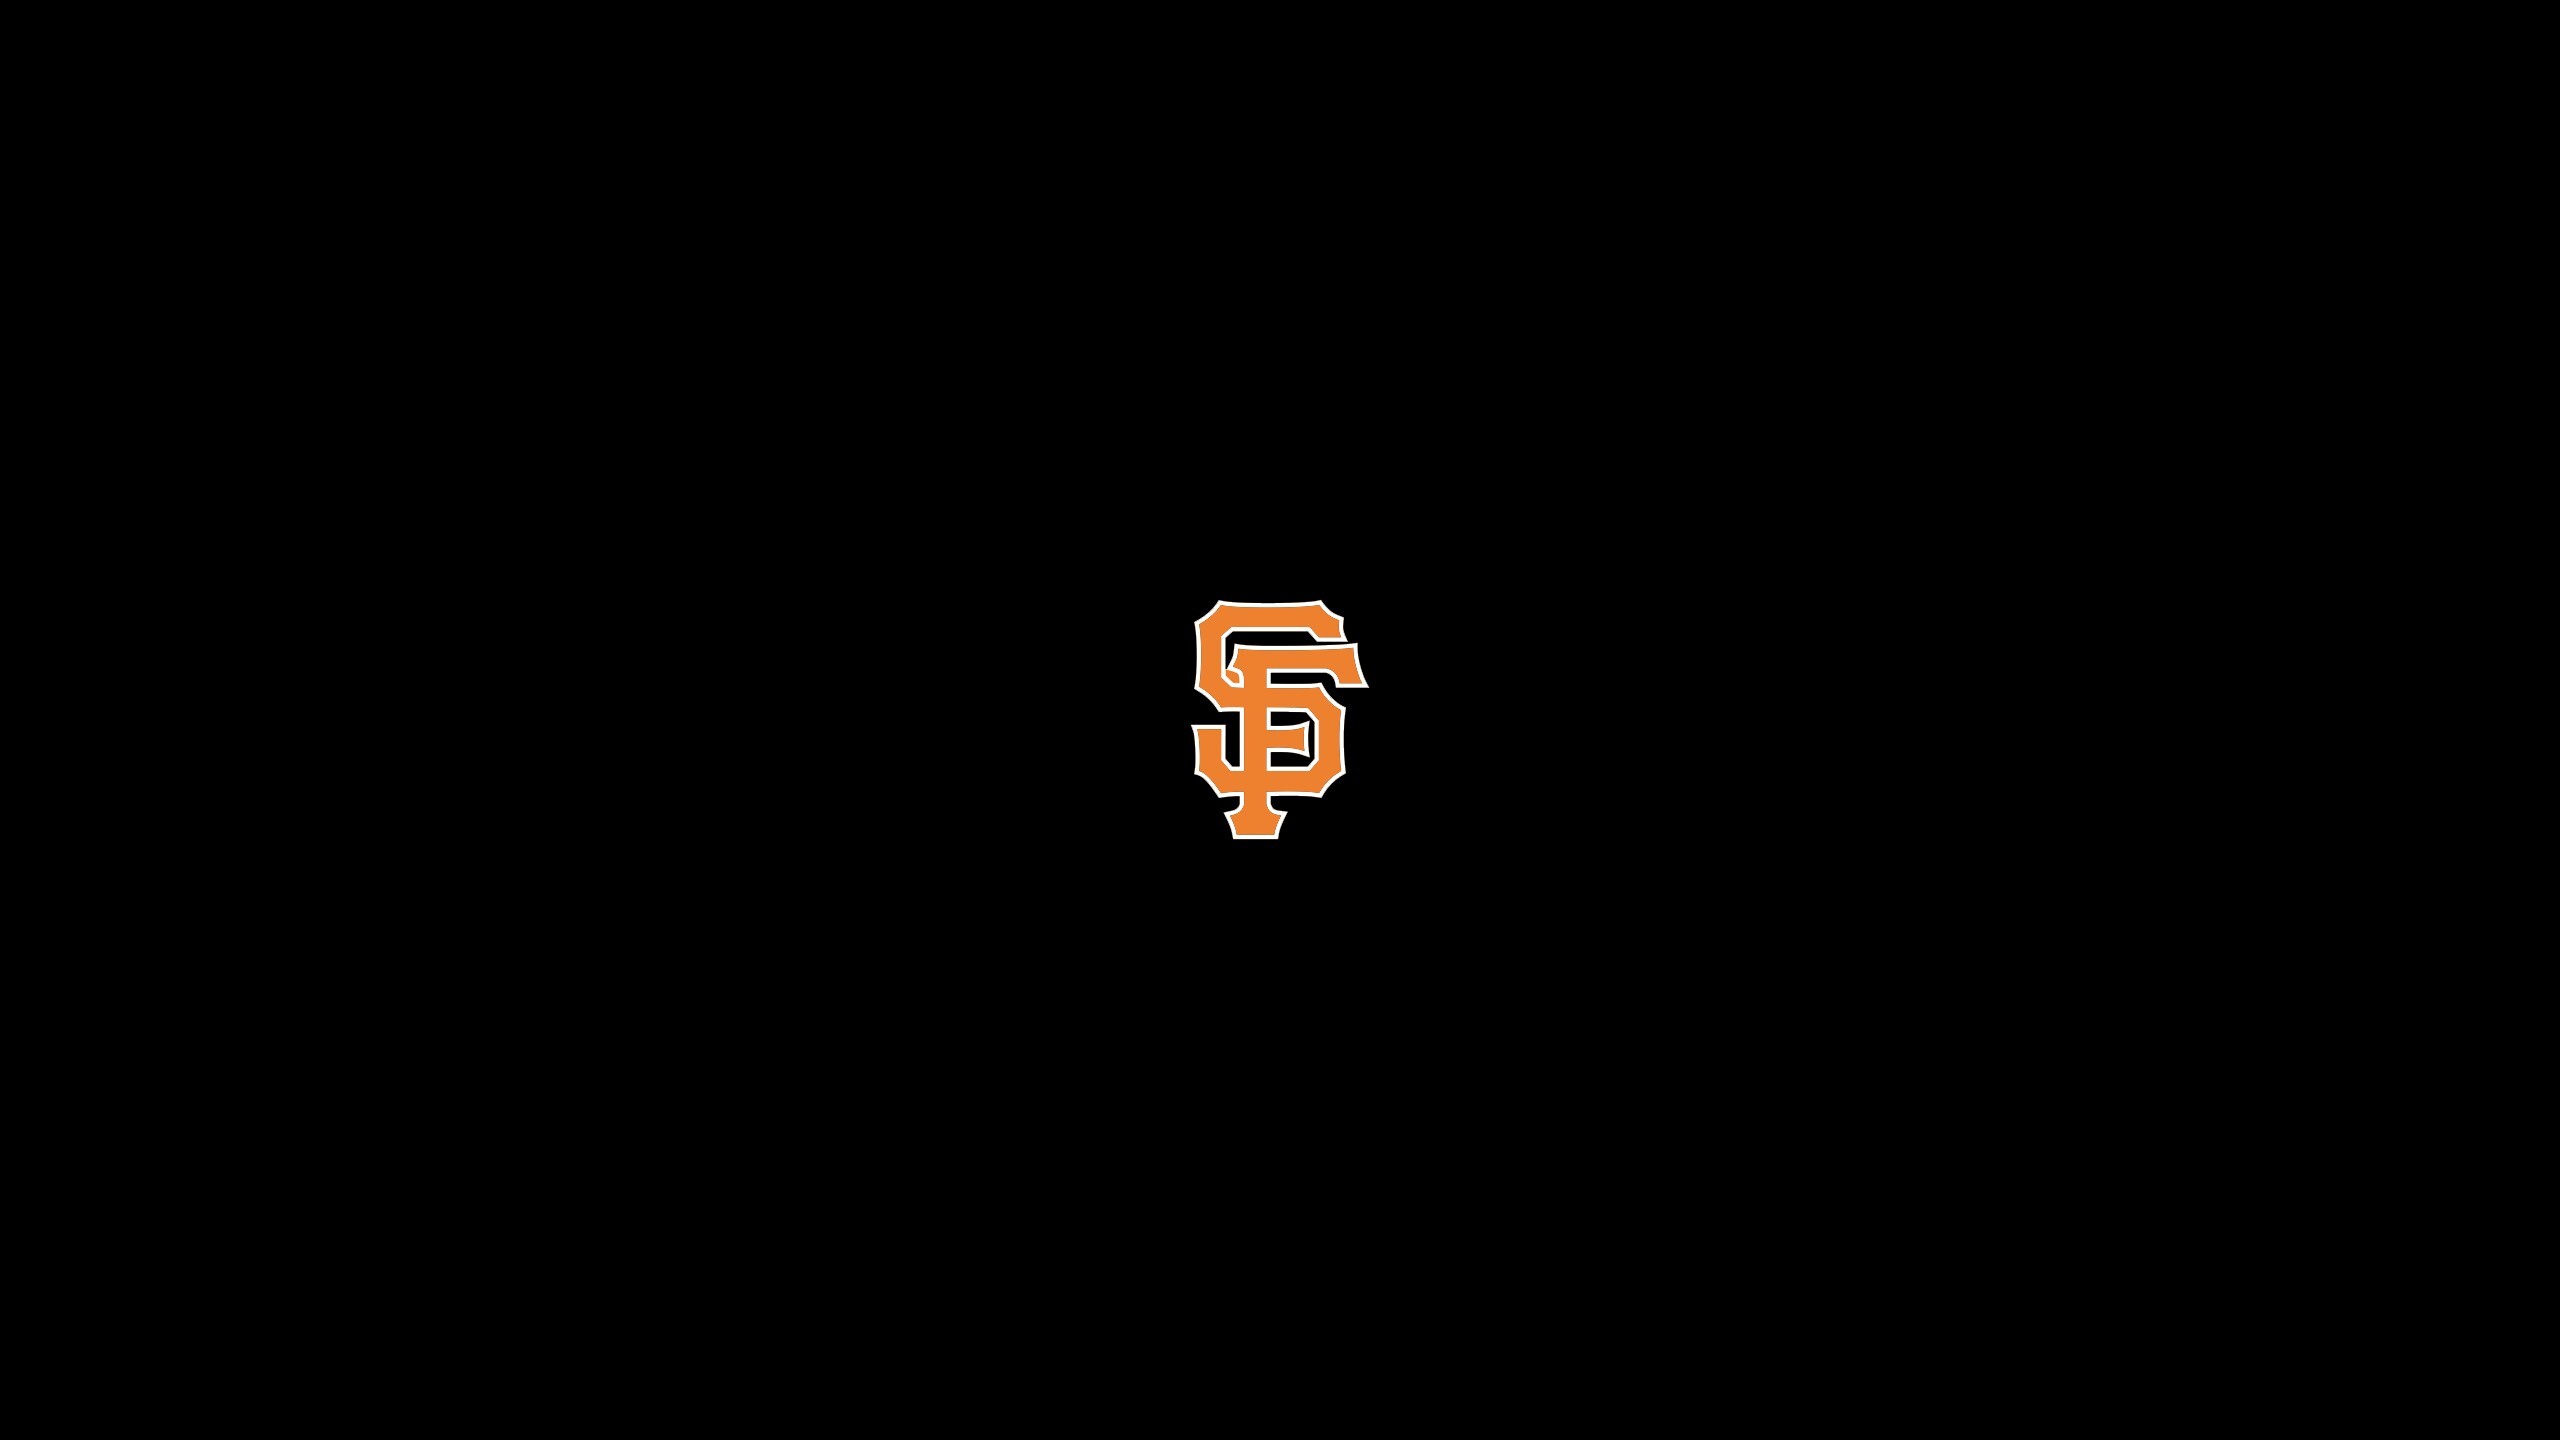 San Francisco Giants: The team was the first major-league organization based in New York City. 2560x1440 HD Background.